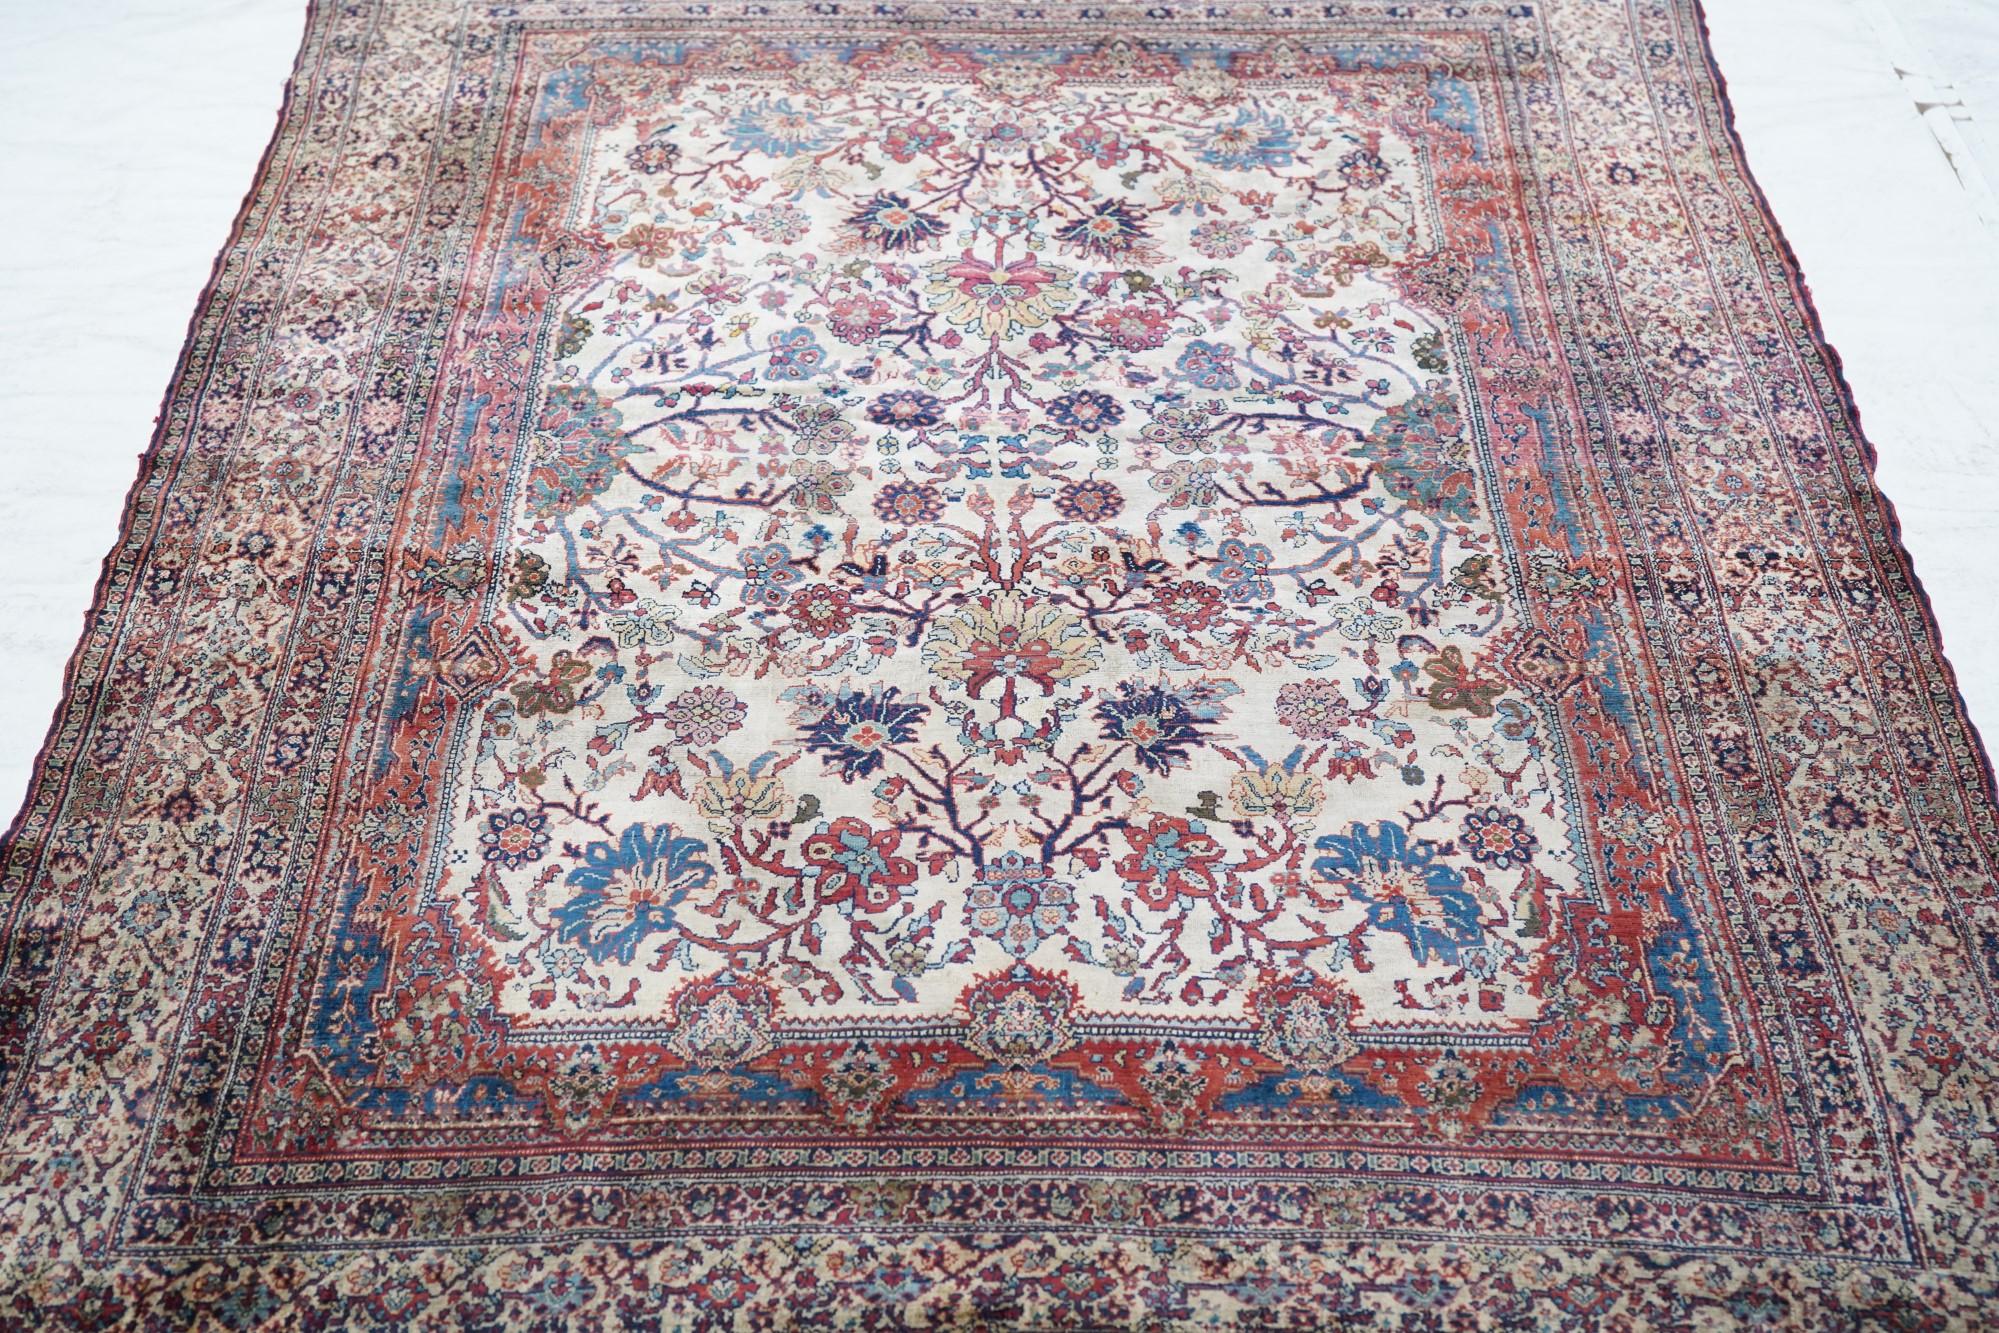 Extreamly Fine Antique and Rare Persian 100% Silk Senneh Rug For Sale 2